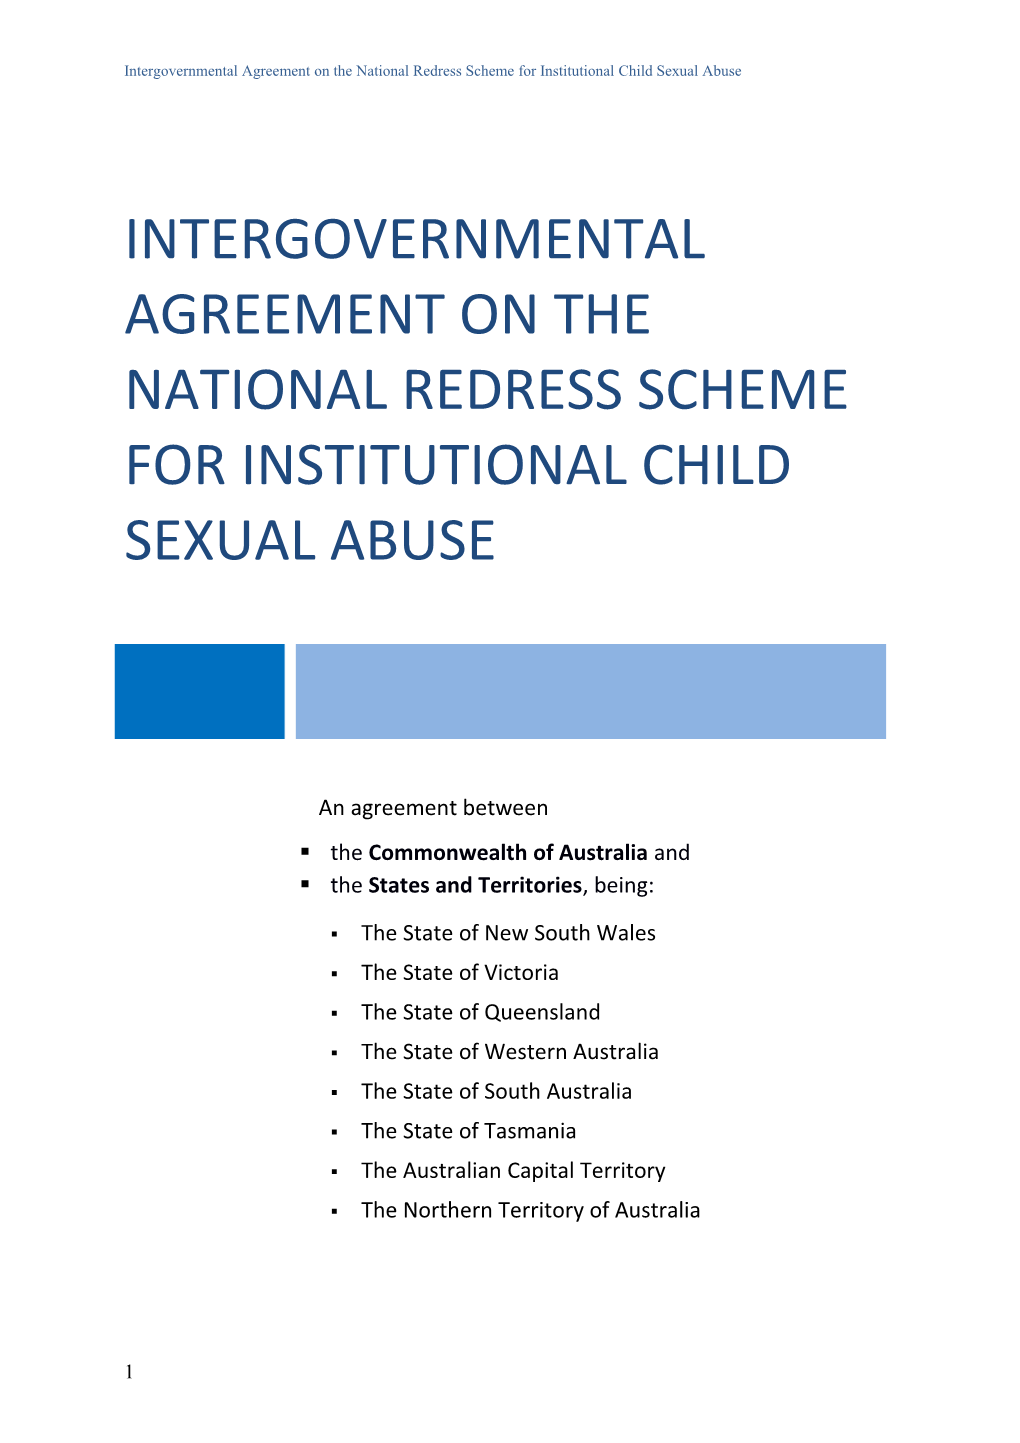 Intergovernmental Agreement on the National Redress Scheme for Institutional Child Sexual Abuse